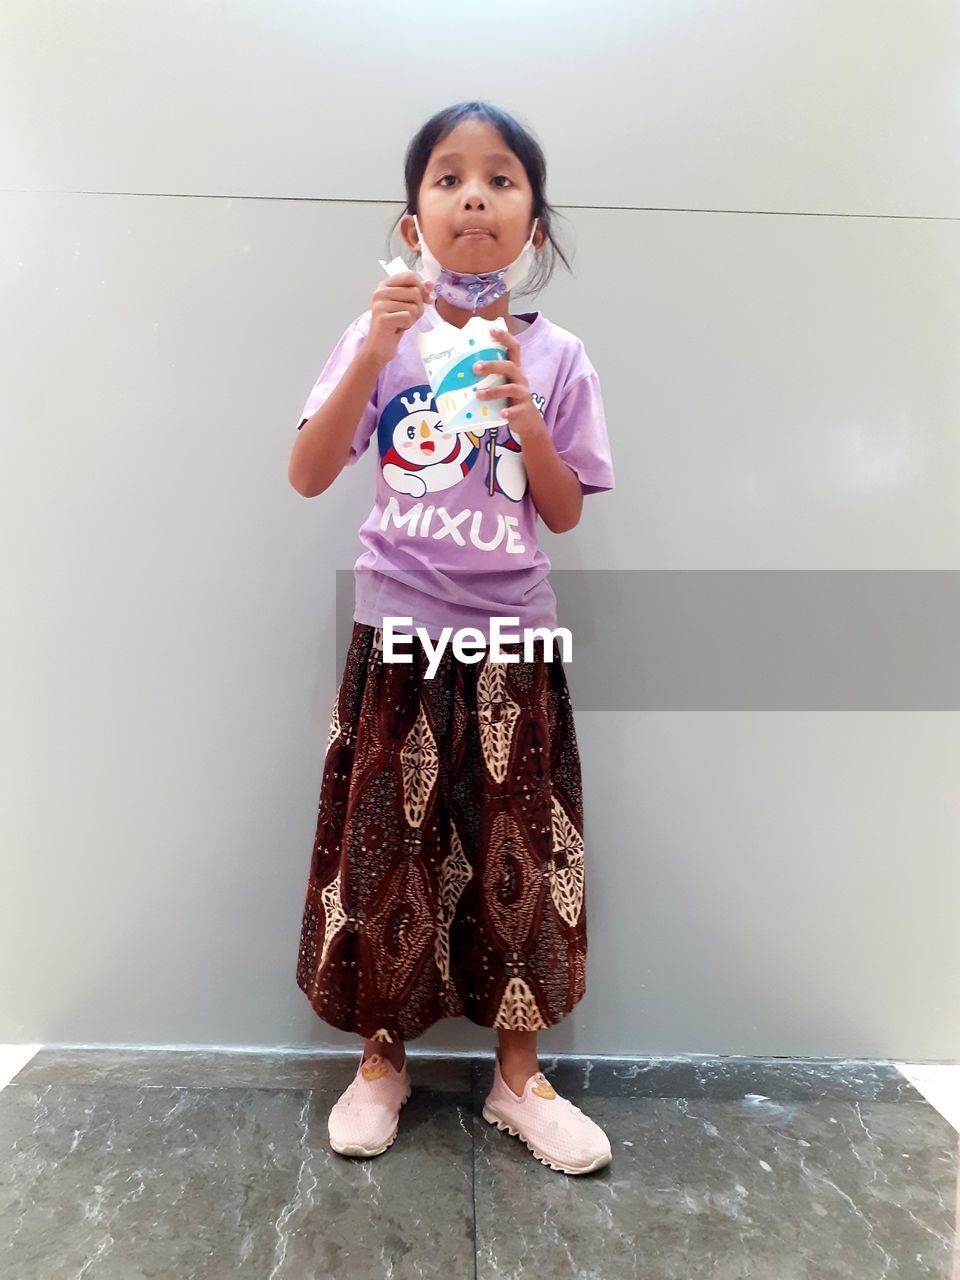 childhood, child, one person, full length, women, female, standing, toddler, indoors, portrait, front view, clothing, cute, looking at camera, person, smiling, innocence, footwear, emotion, lifestyles, happiness, casual clothing, baby, skirt, dress, photo shoot, pink, holding, copy space, human face